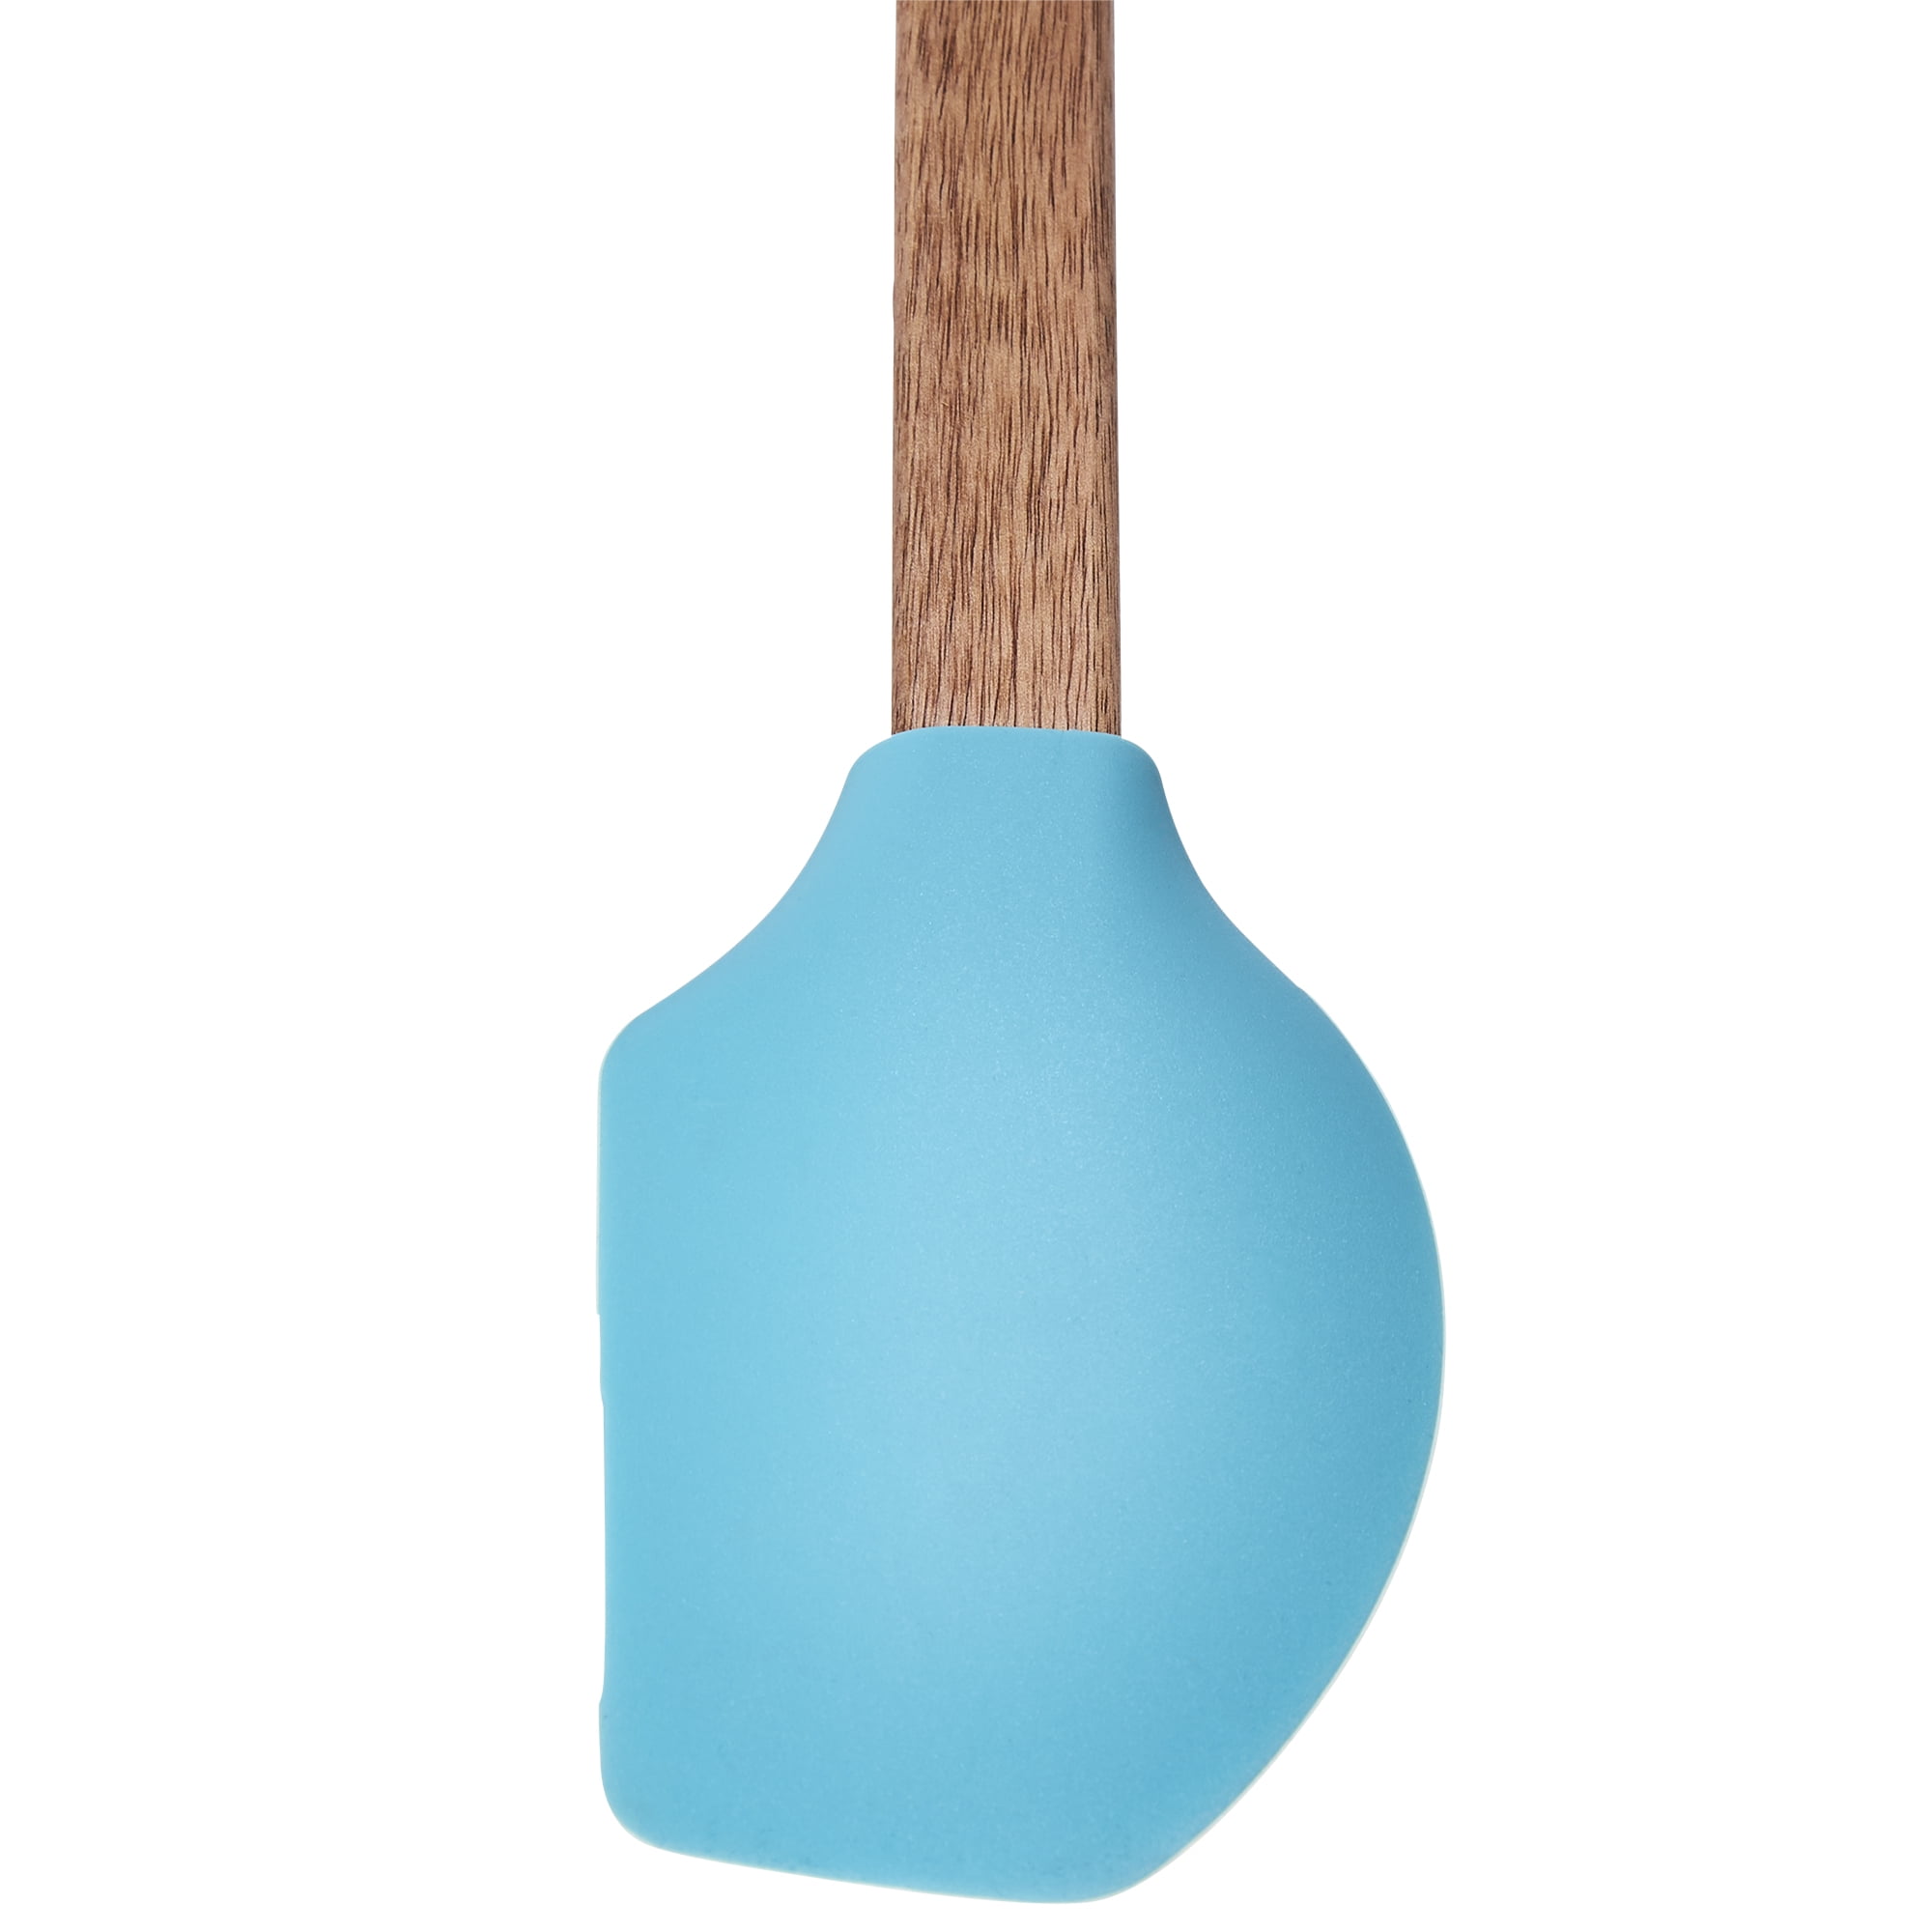 The Pioneer Woman 10-Piece Silicone and Acacia Wood Handle Cooking Utensils  Set, Blue